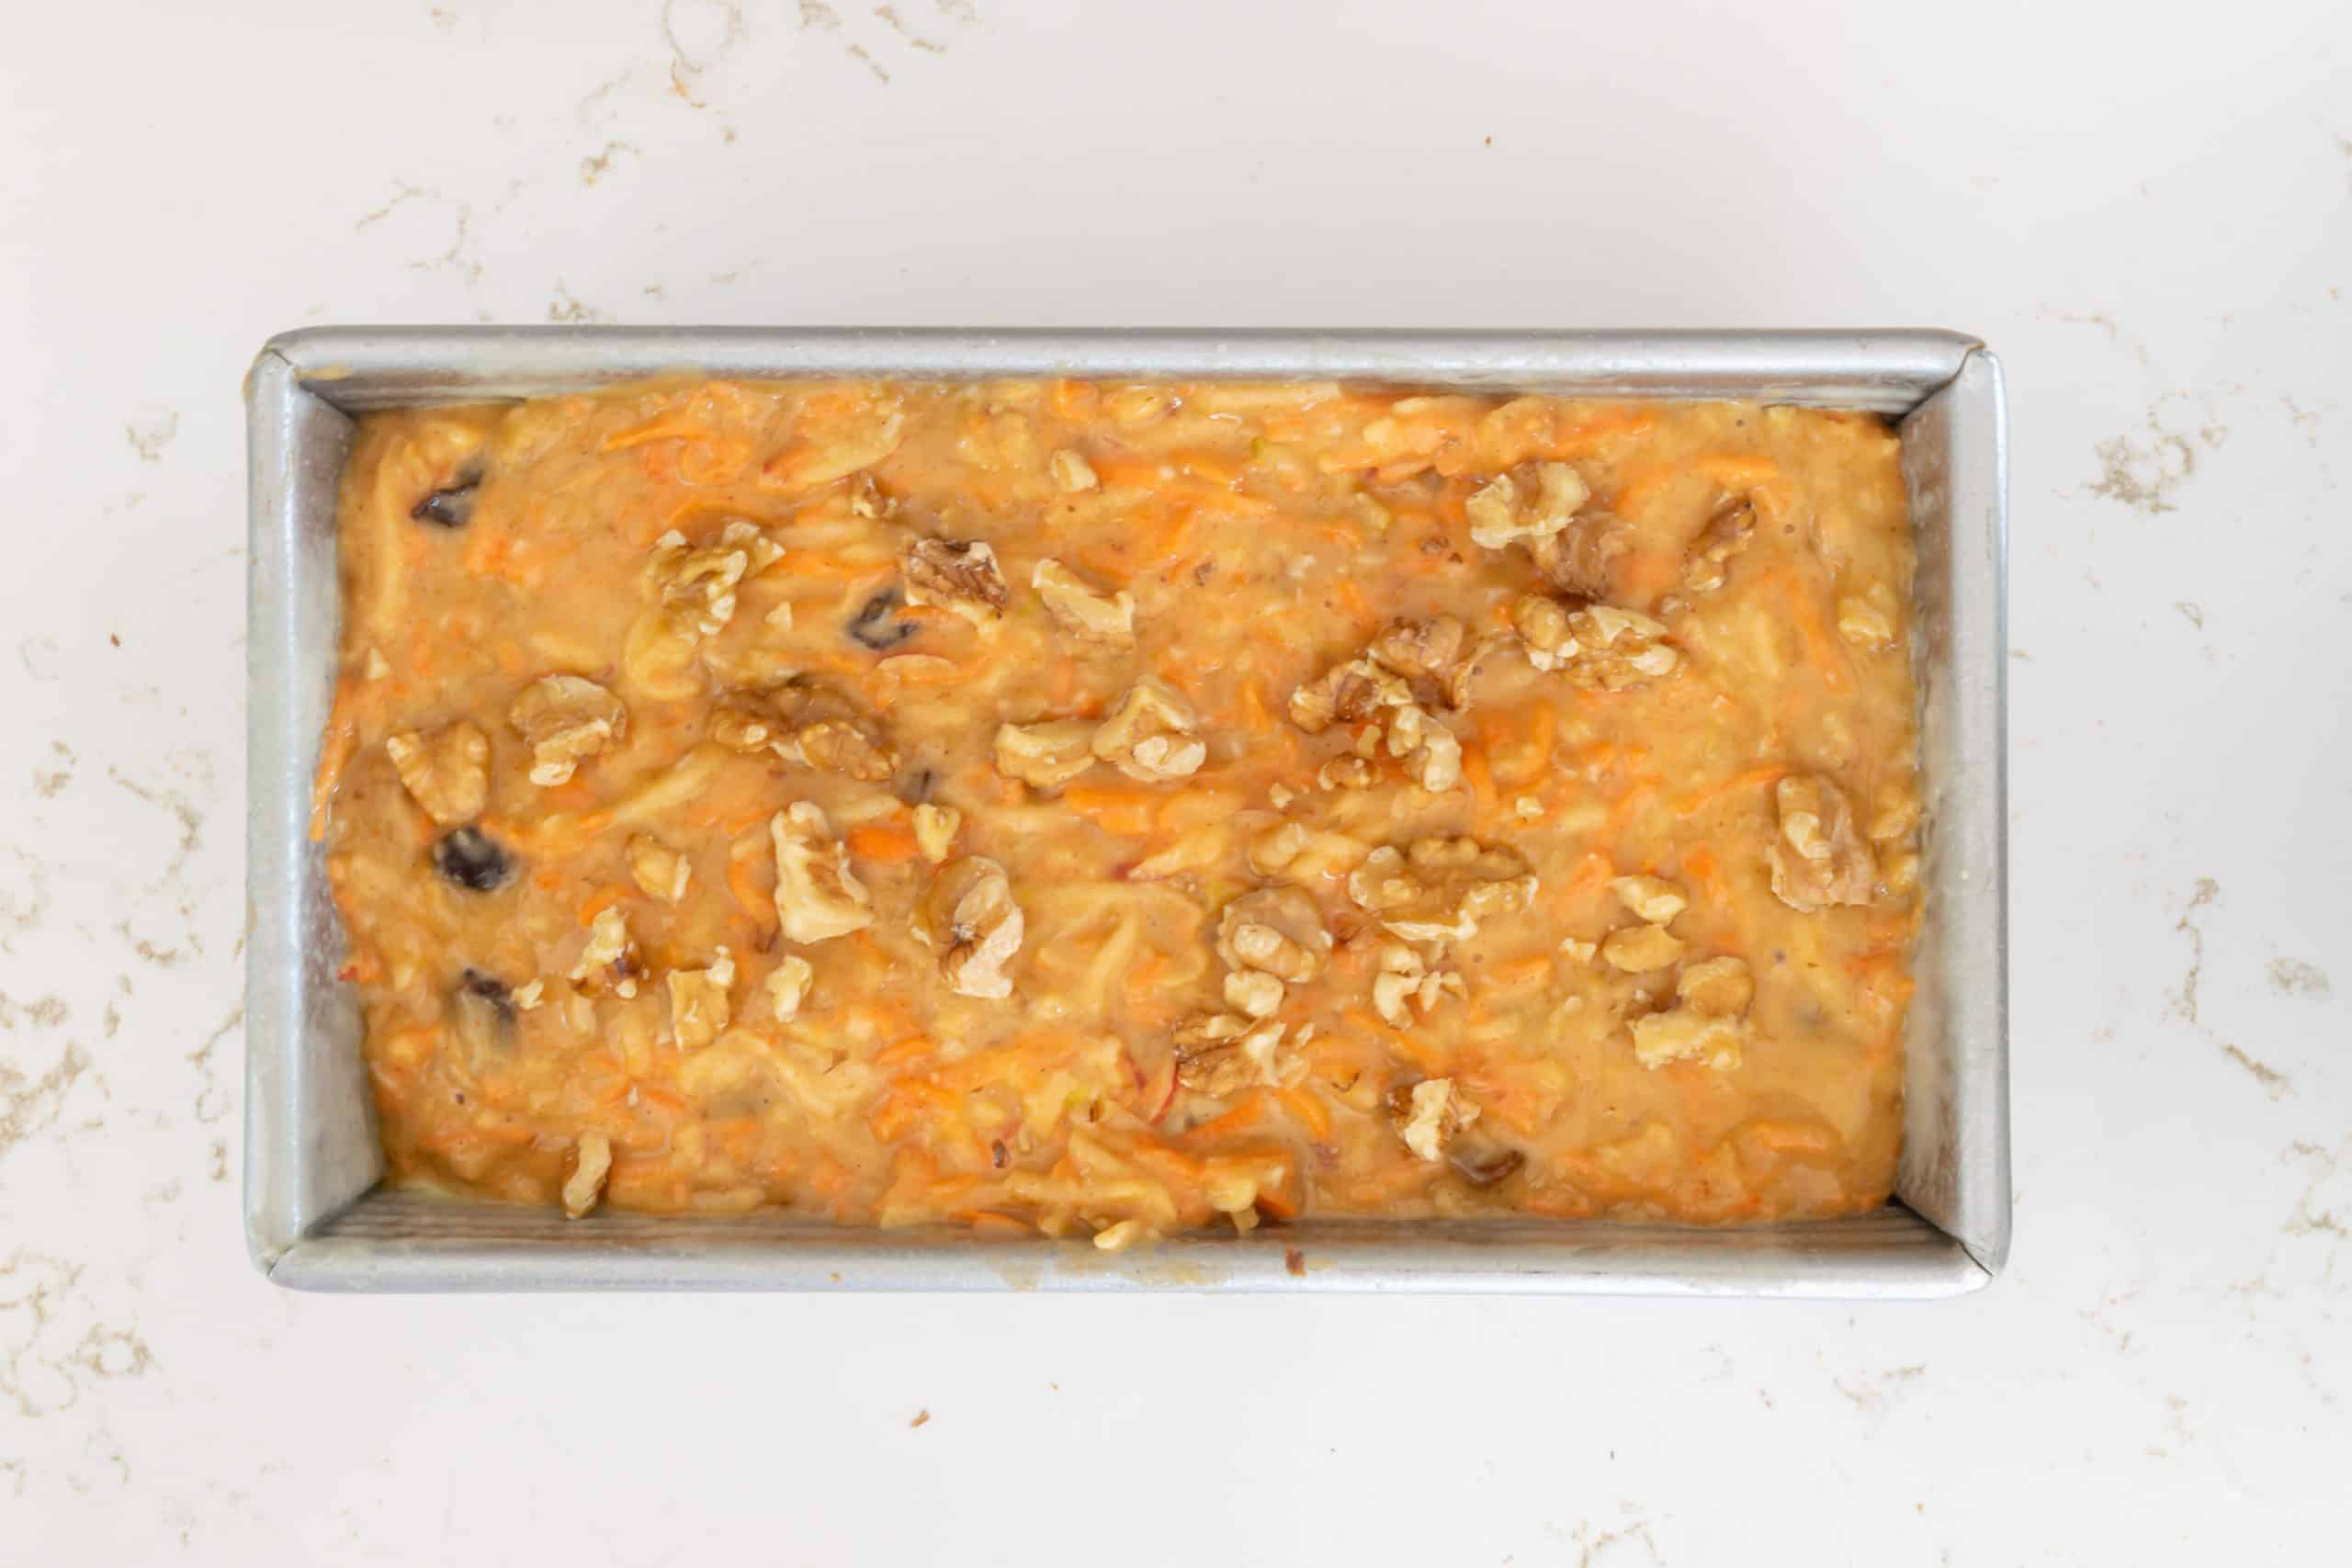 Bread batter in loaf pan, sprinkled with walnuts.